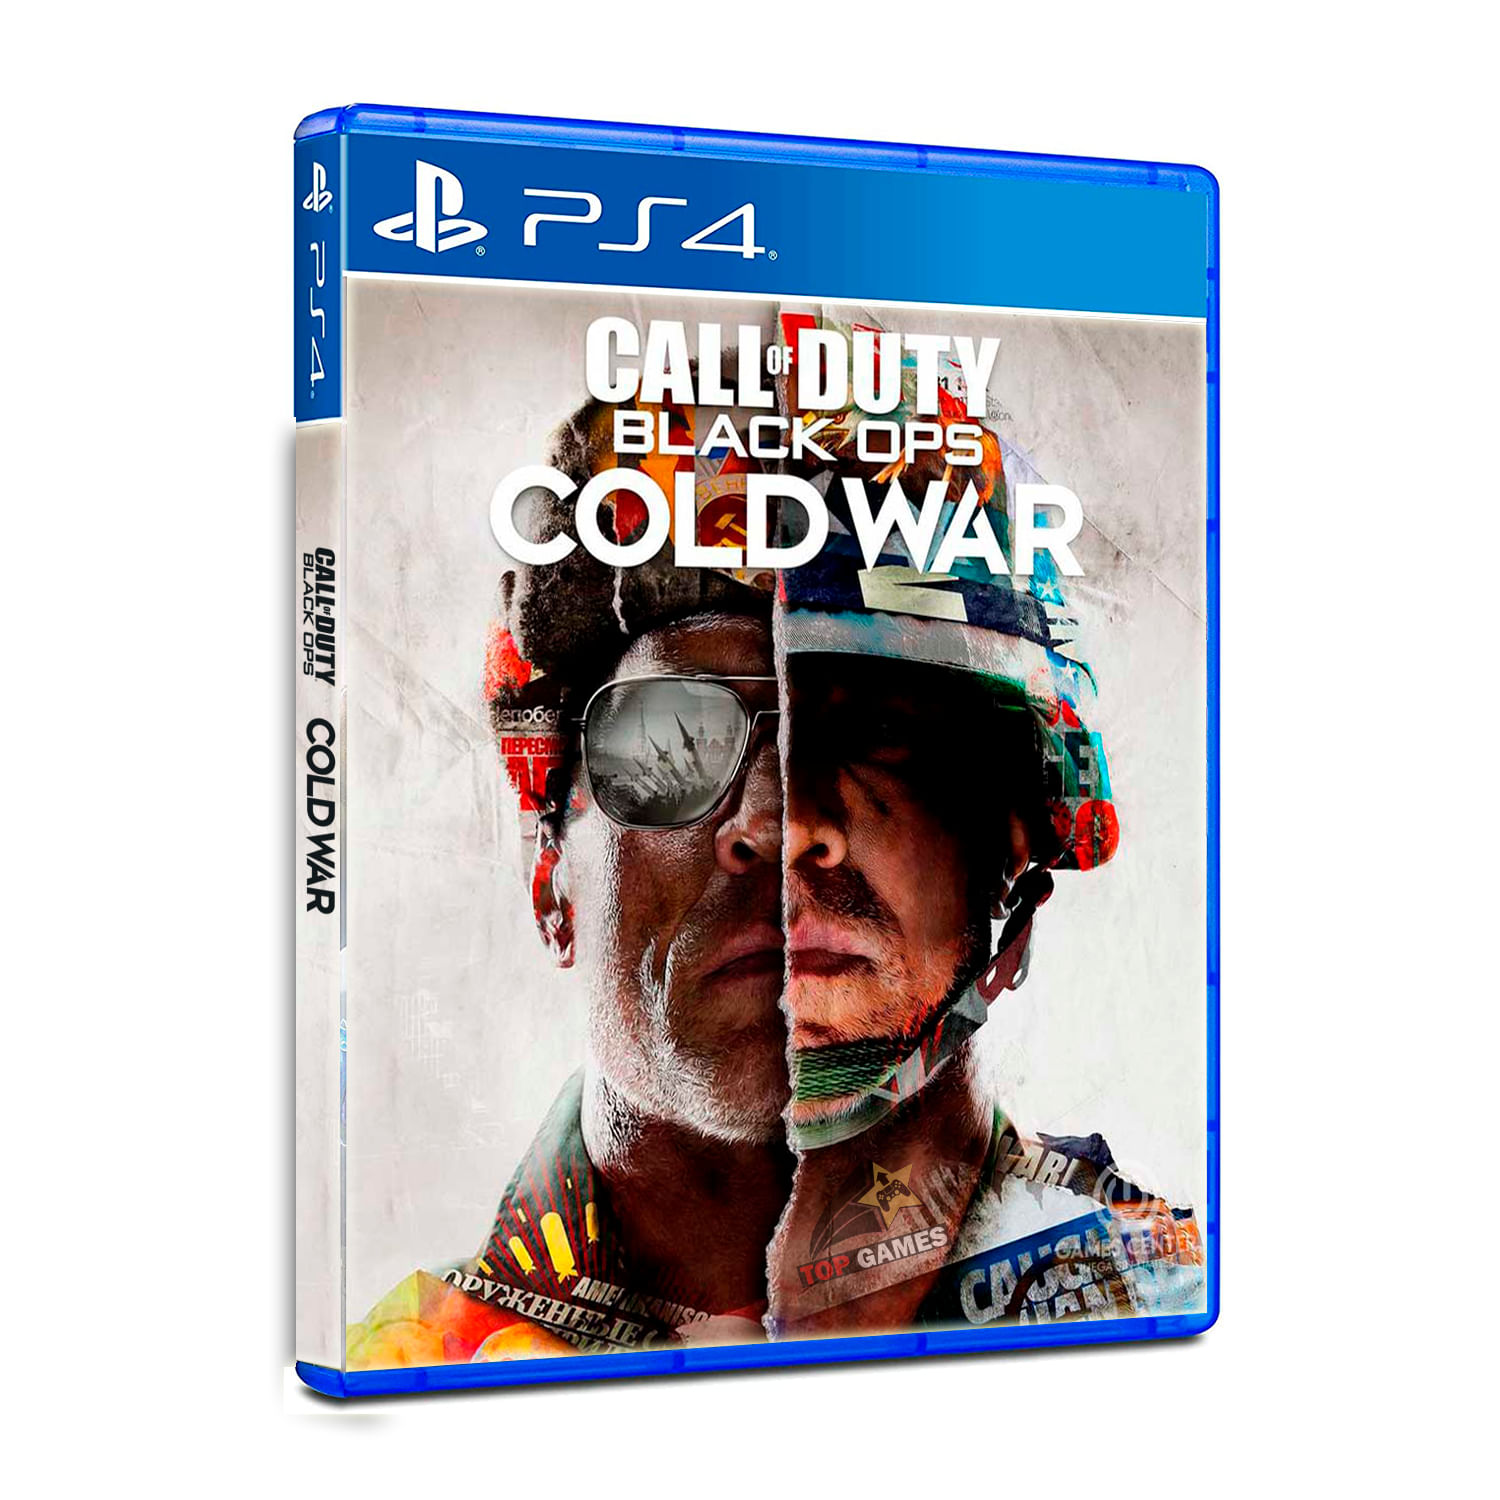 Juego Ps4 Call of Duty Black Ops Cold War